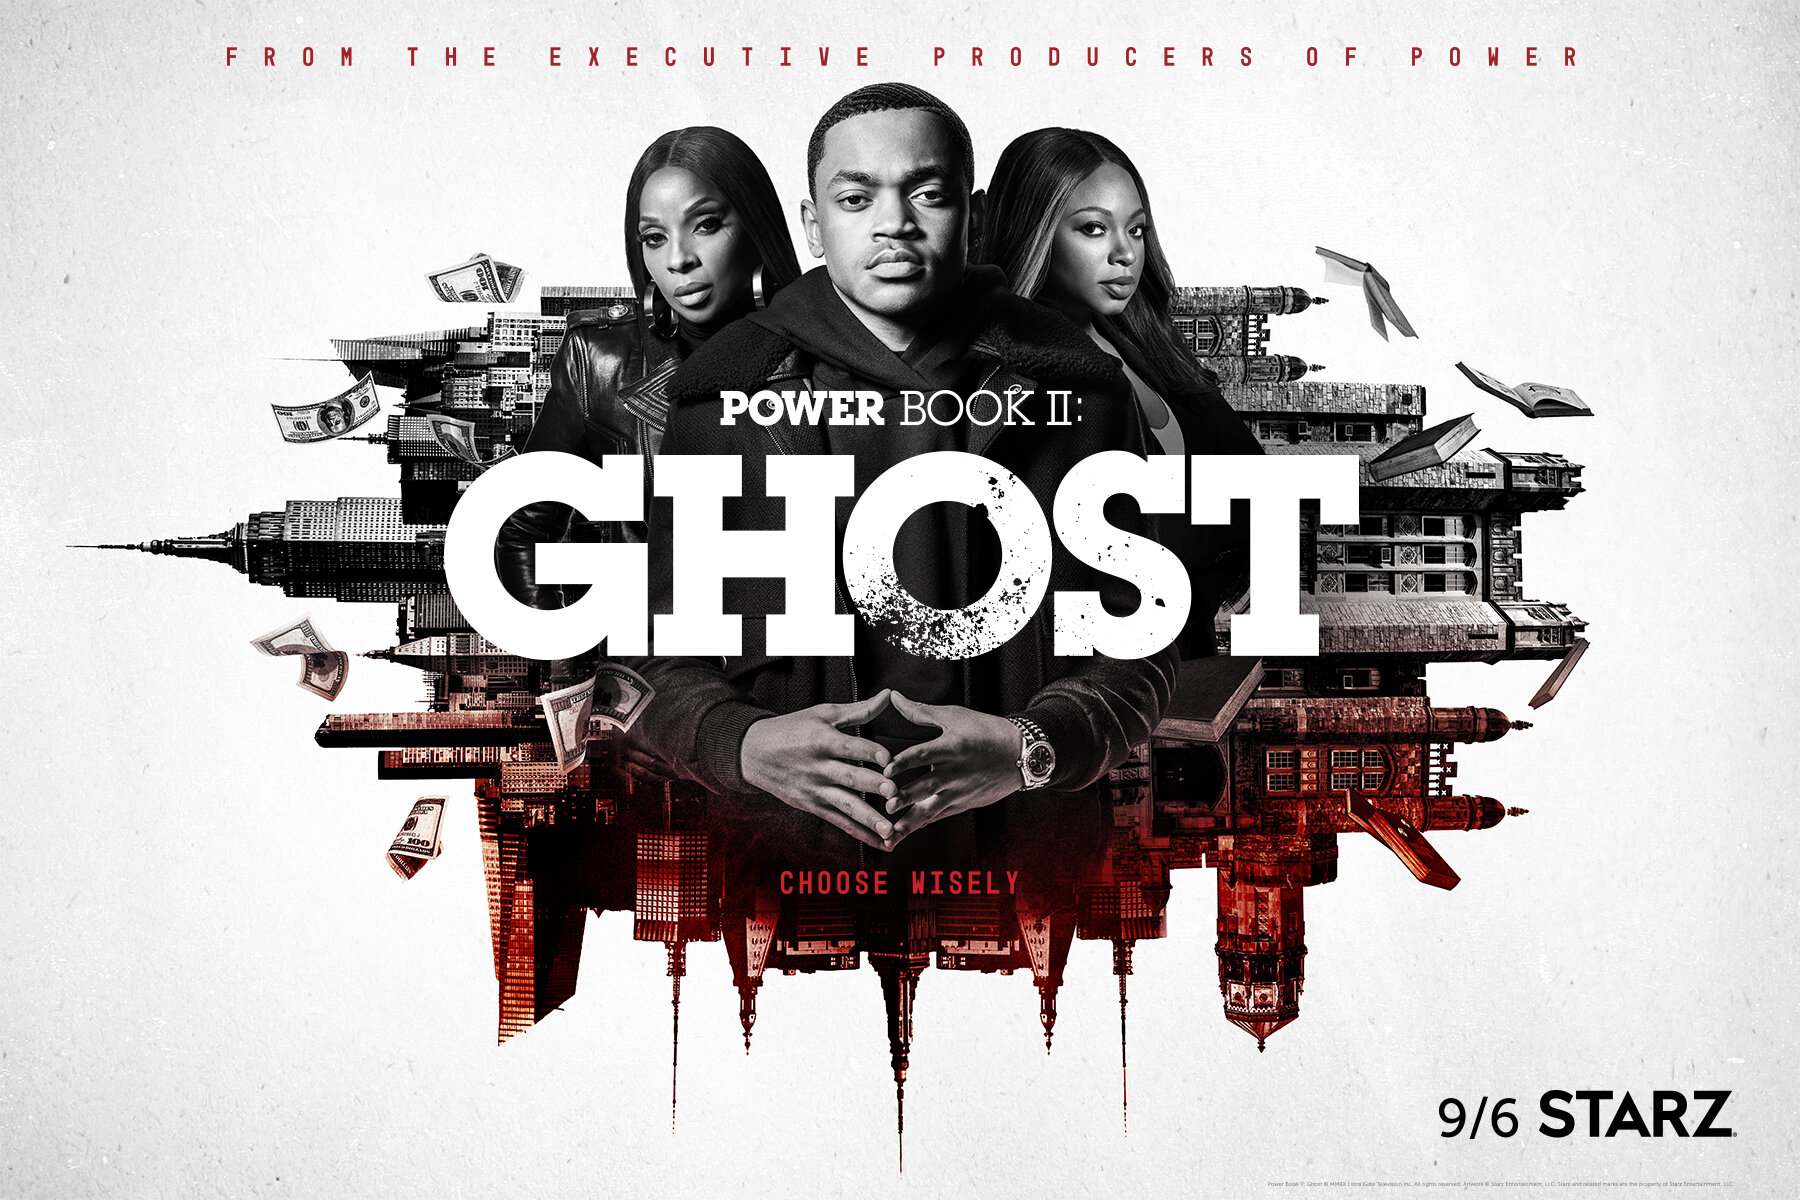 Collecting' Ep. 3 Clip, Power Book II: Ghost